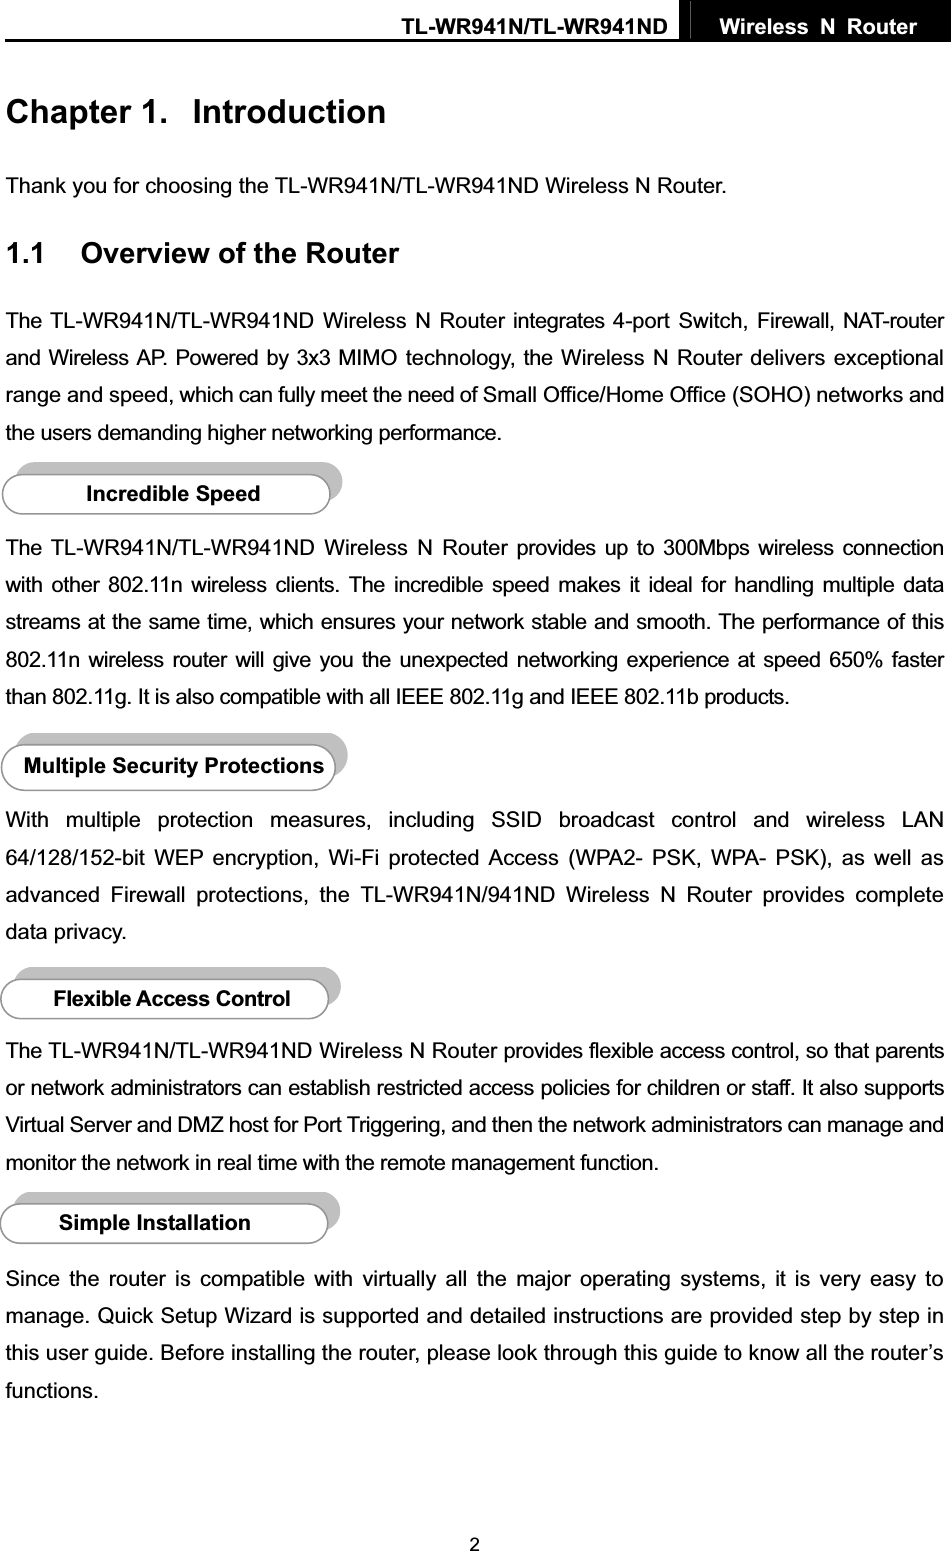 TL-WR941N/TL-WR941ND  Wireless N Router  2Chapter 1.  IntroductionThank you for choosing the TL-WR941N/TL-WR941ND Wireless N Router. 1.1 Overview of the Router The TL-WR941N/TL-WR941ND Wireless N Router integrates 4-port Switch, Firewall, NAT-router and Wireless AP. Powered by 3x3 MIMO technology, the Wireless N Router delivers exceptional range and speed, which can fully meet the need of Small Office/Home Office (SOHO) networks and the users demanding higher networking performance. The TL-WR941N/TL-WR941ND Wireless N Router provides up to 300Mbps wireless connection with other 802.11n wireless clients. The incredible speed makes it ideal for handling multiple data streams at the same time, which ensures your network stable and smooth. The performance of this 802.11n wireless router will give you the unexpected networking experience at speed 650% faster than 802.11g. It is also compatible with all IEEE 802.11g and IEEE 802.11b products. With multiple protection measures, including SSID broadcast control and wireless LAN 64/128/152-bit WEP encryption, Wi-Fi protected Access (WPA2- PSK, WPA- PSK), as well as advanced Firewall protections, the TL-WR941N/941ND Wireless N Router provides complete data privacy.   The TL-WR941N/TL-WR941ND Wireless N Router provides flexible access control, so that parents or network administrators can establish restricted access policies for children or staff. It also supports Virtual Server and DMZ host for Port Triggering, and then the network administrators can manage and monitor the network in real time with the remote management function.   Since the router is compatible with virtually all the major operating systems, it is very easy to manage. Quick Setup Wizard is supported and detailed instructions are provided step by step in this user guide. Before installing the router, please look through this guide to know all the router’s functions.Simple InstallationFlexible Access Control Multiple Security ProtectionsIncredible Speed 